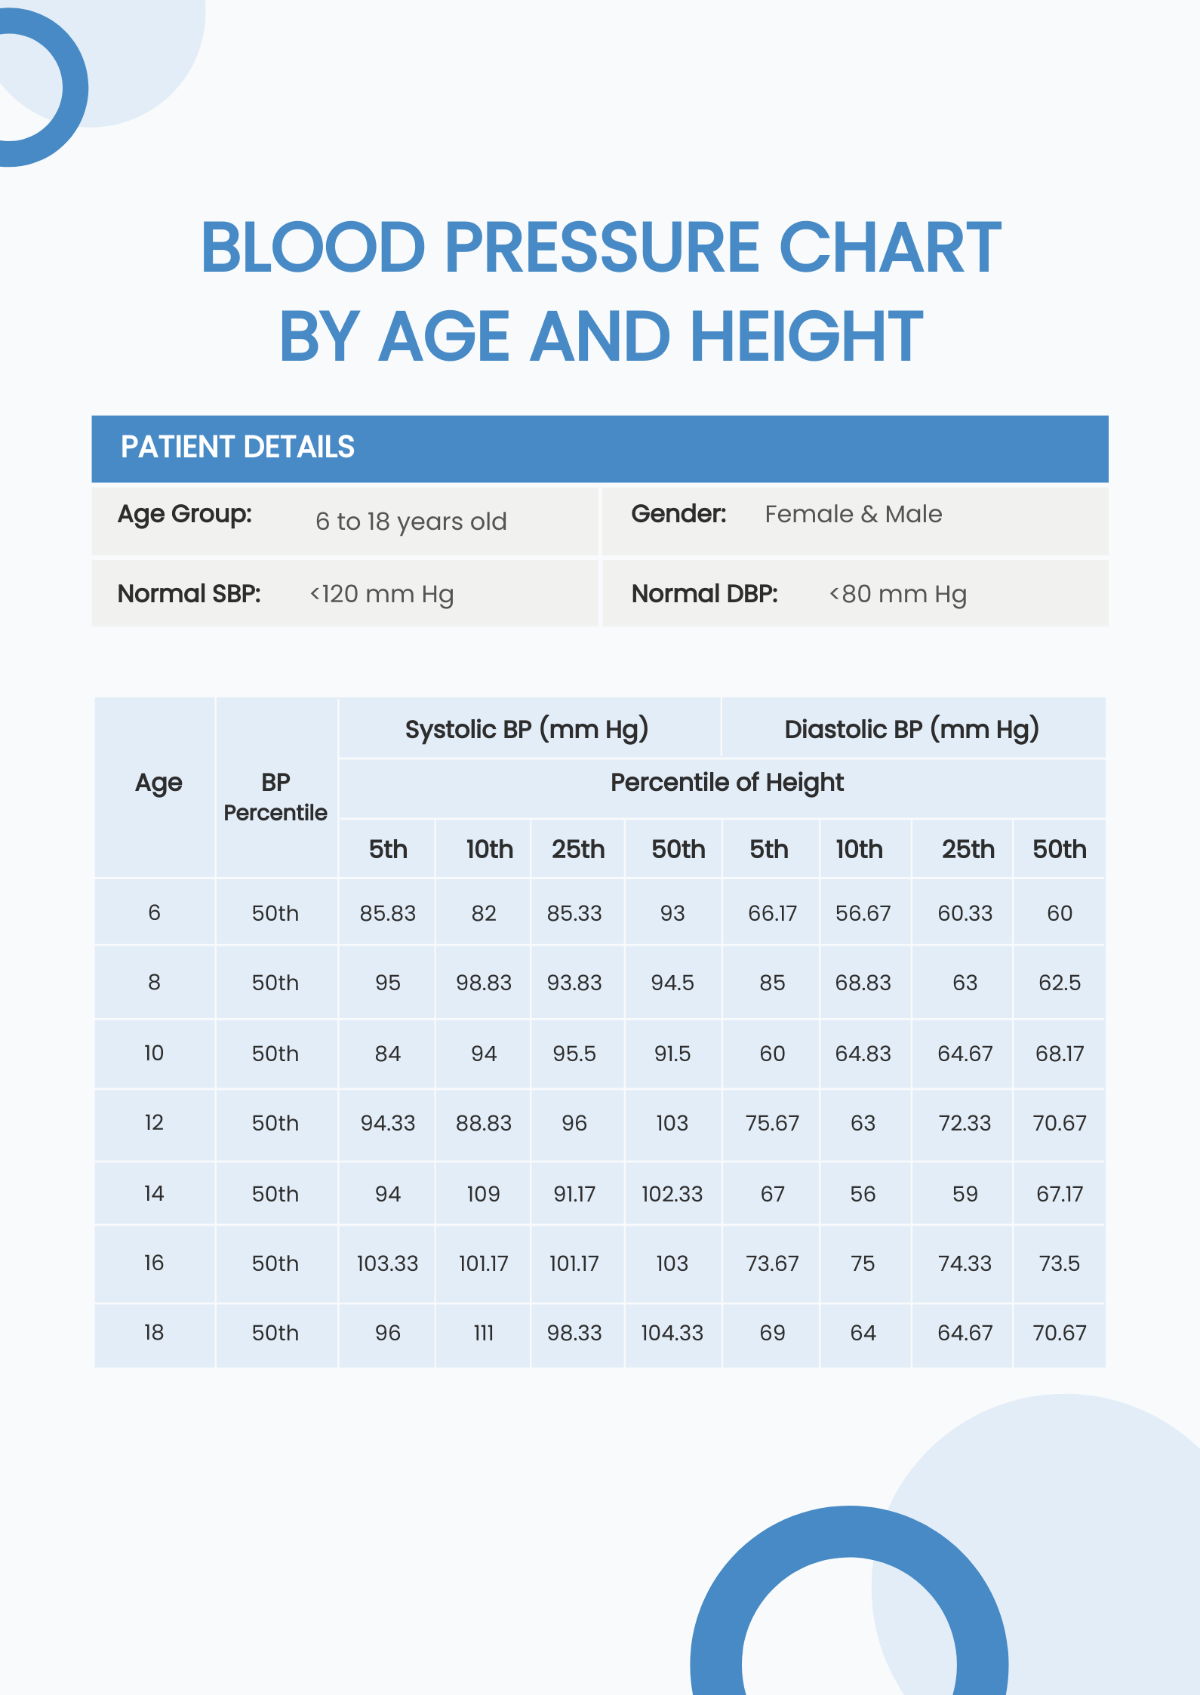 Blood Pressure Chart By Age And Height Template